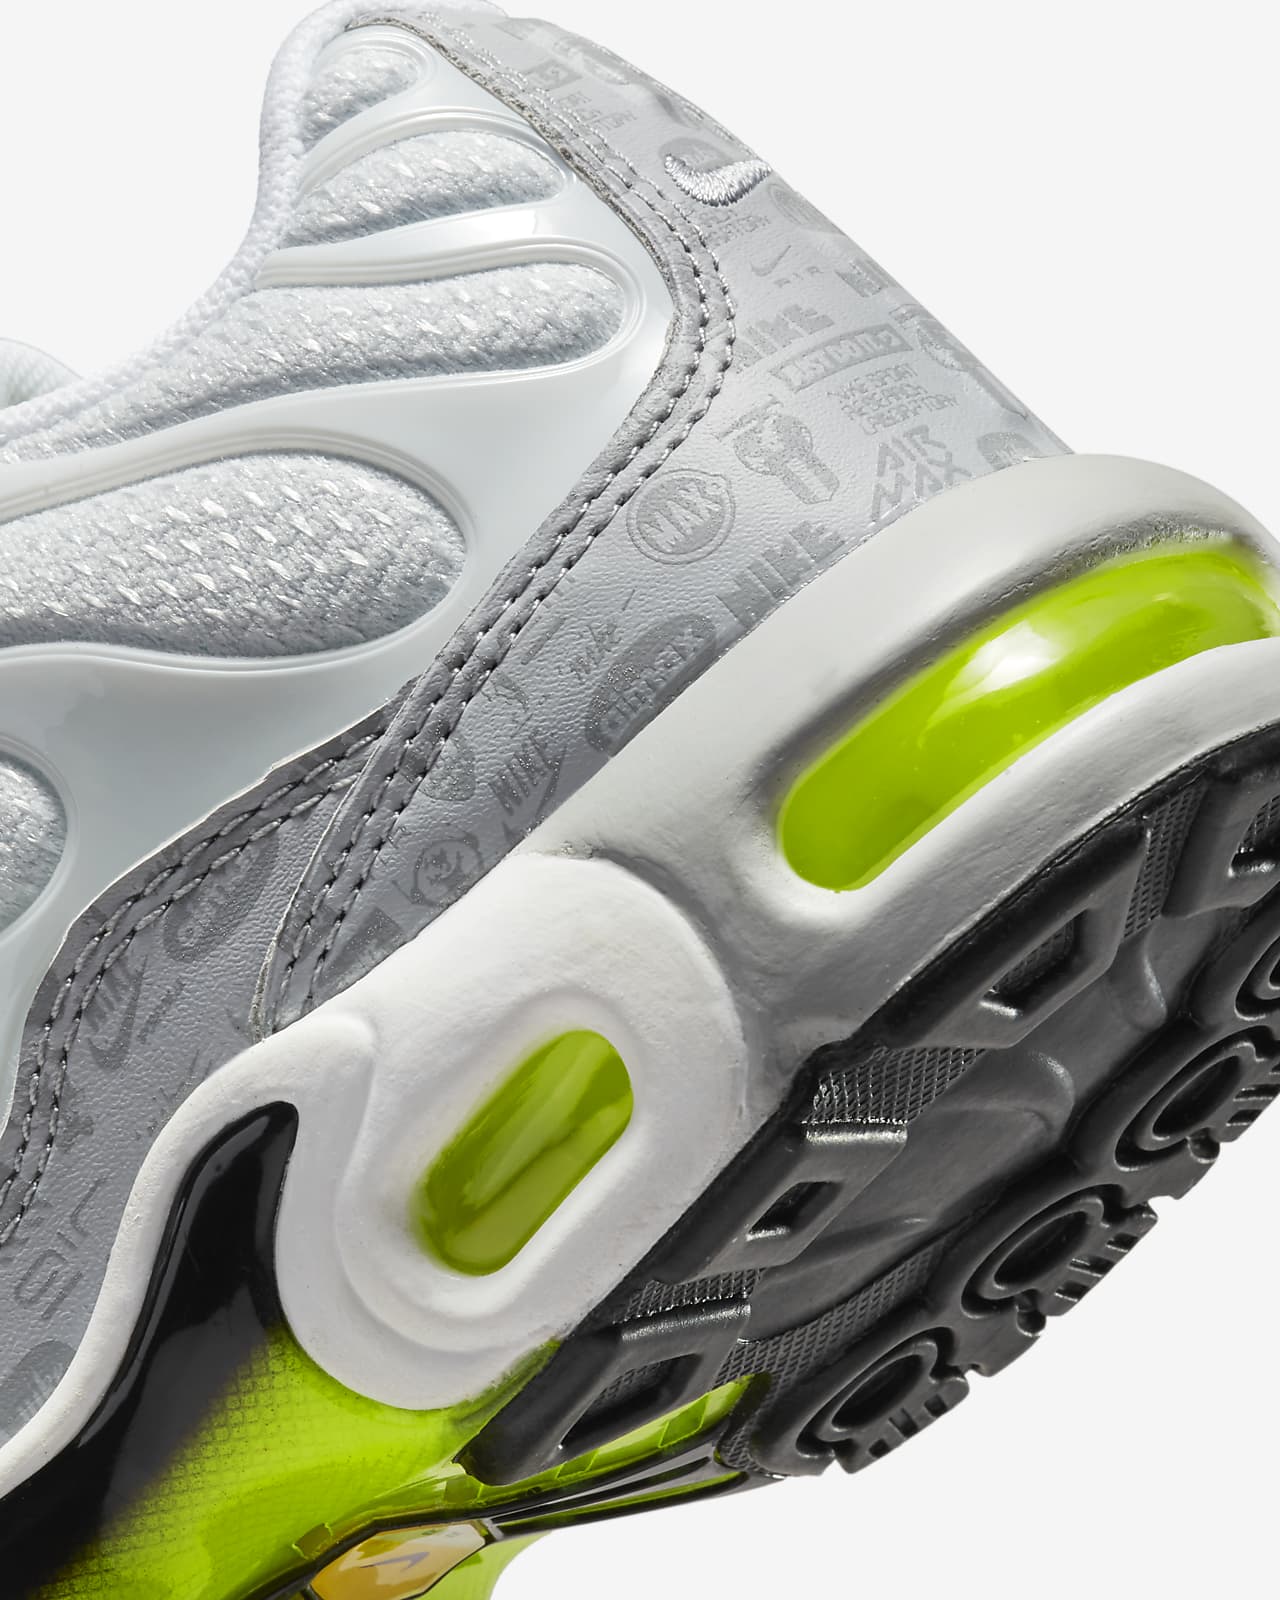 Nike Air Max Plus Younger Kids' Shoes. Nike ZA